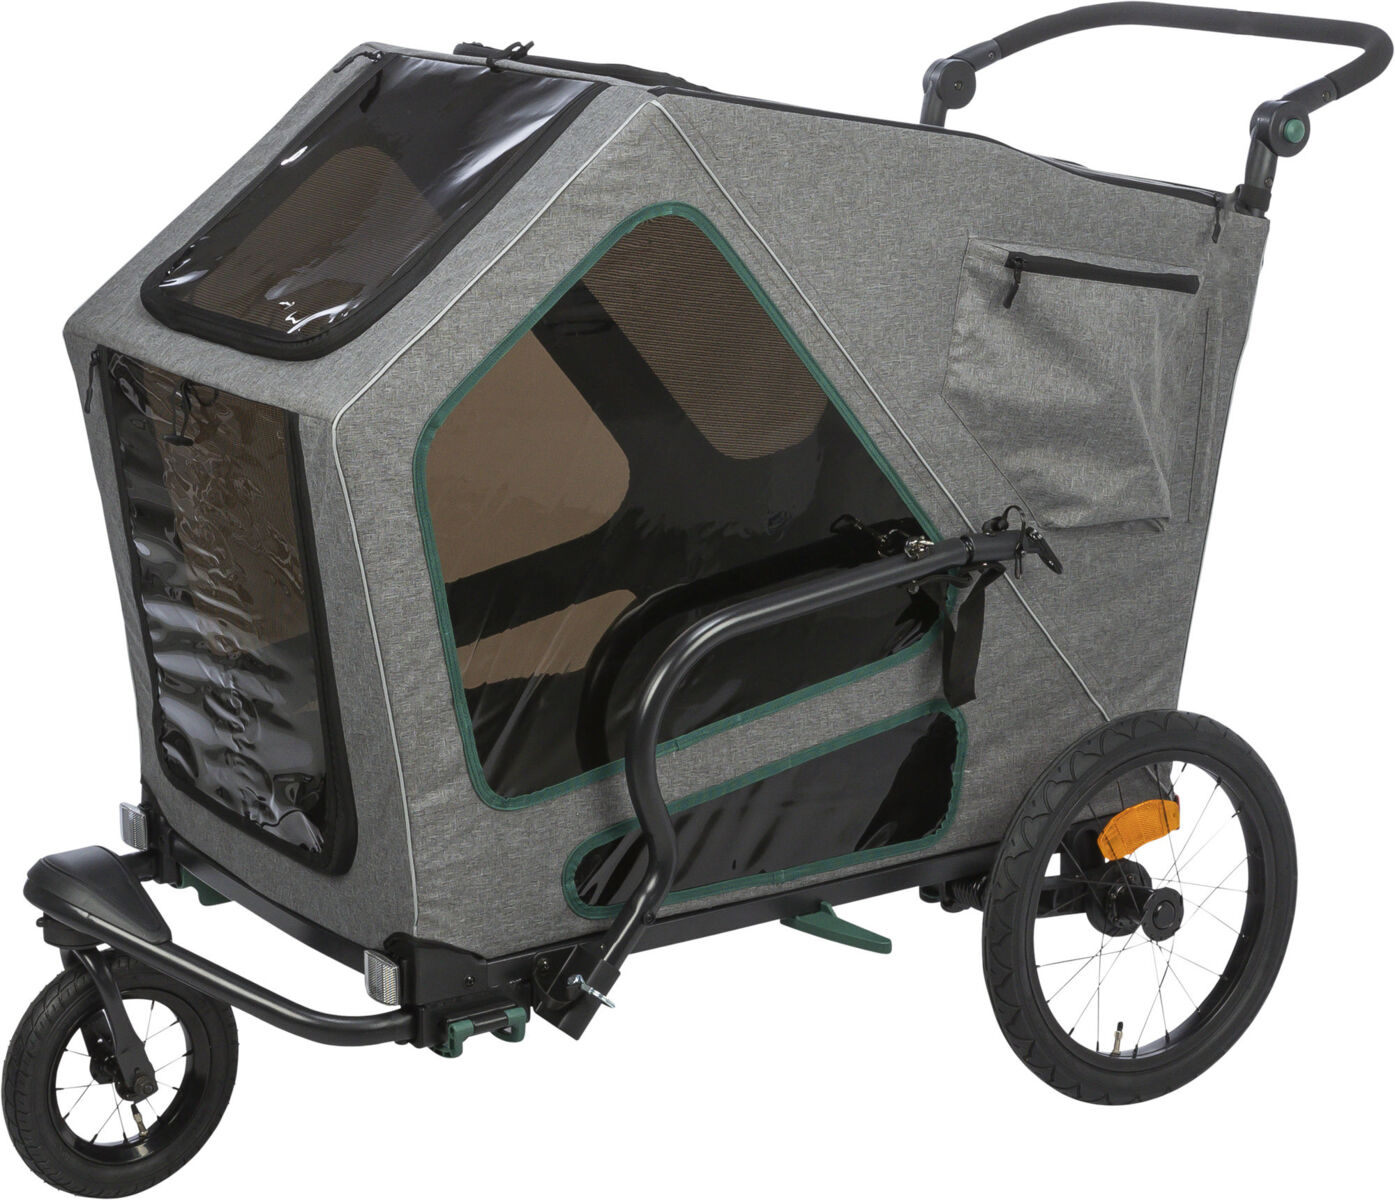 Bicycle trailer for dogs